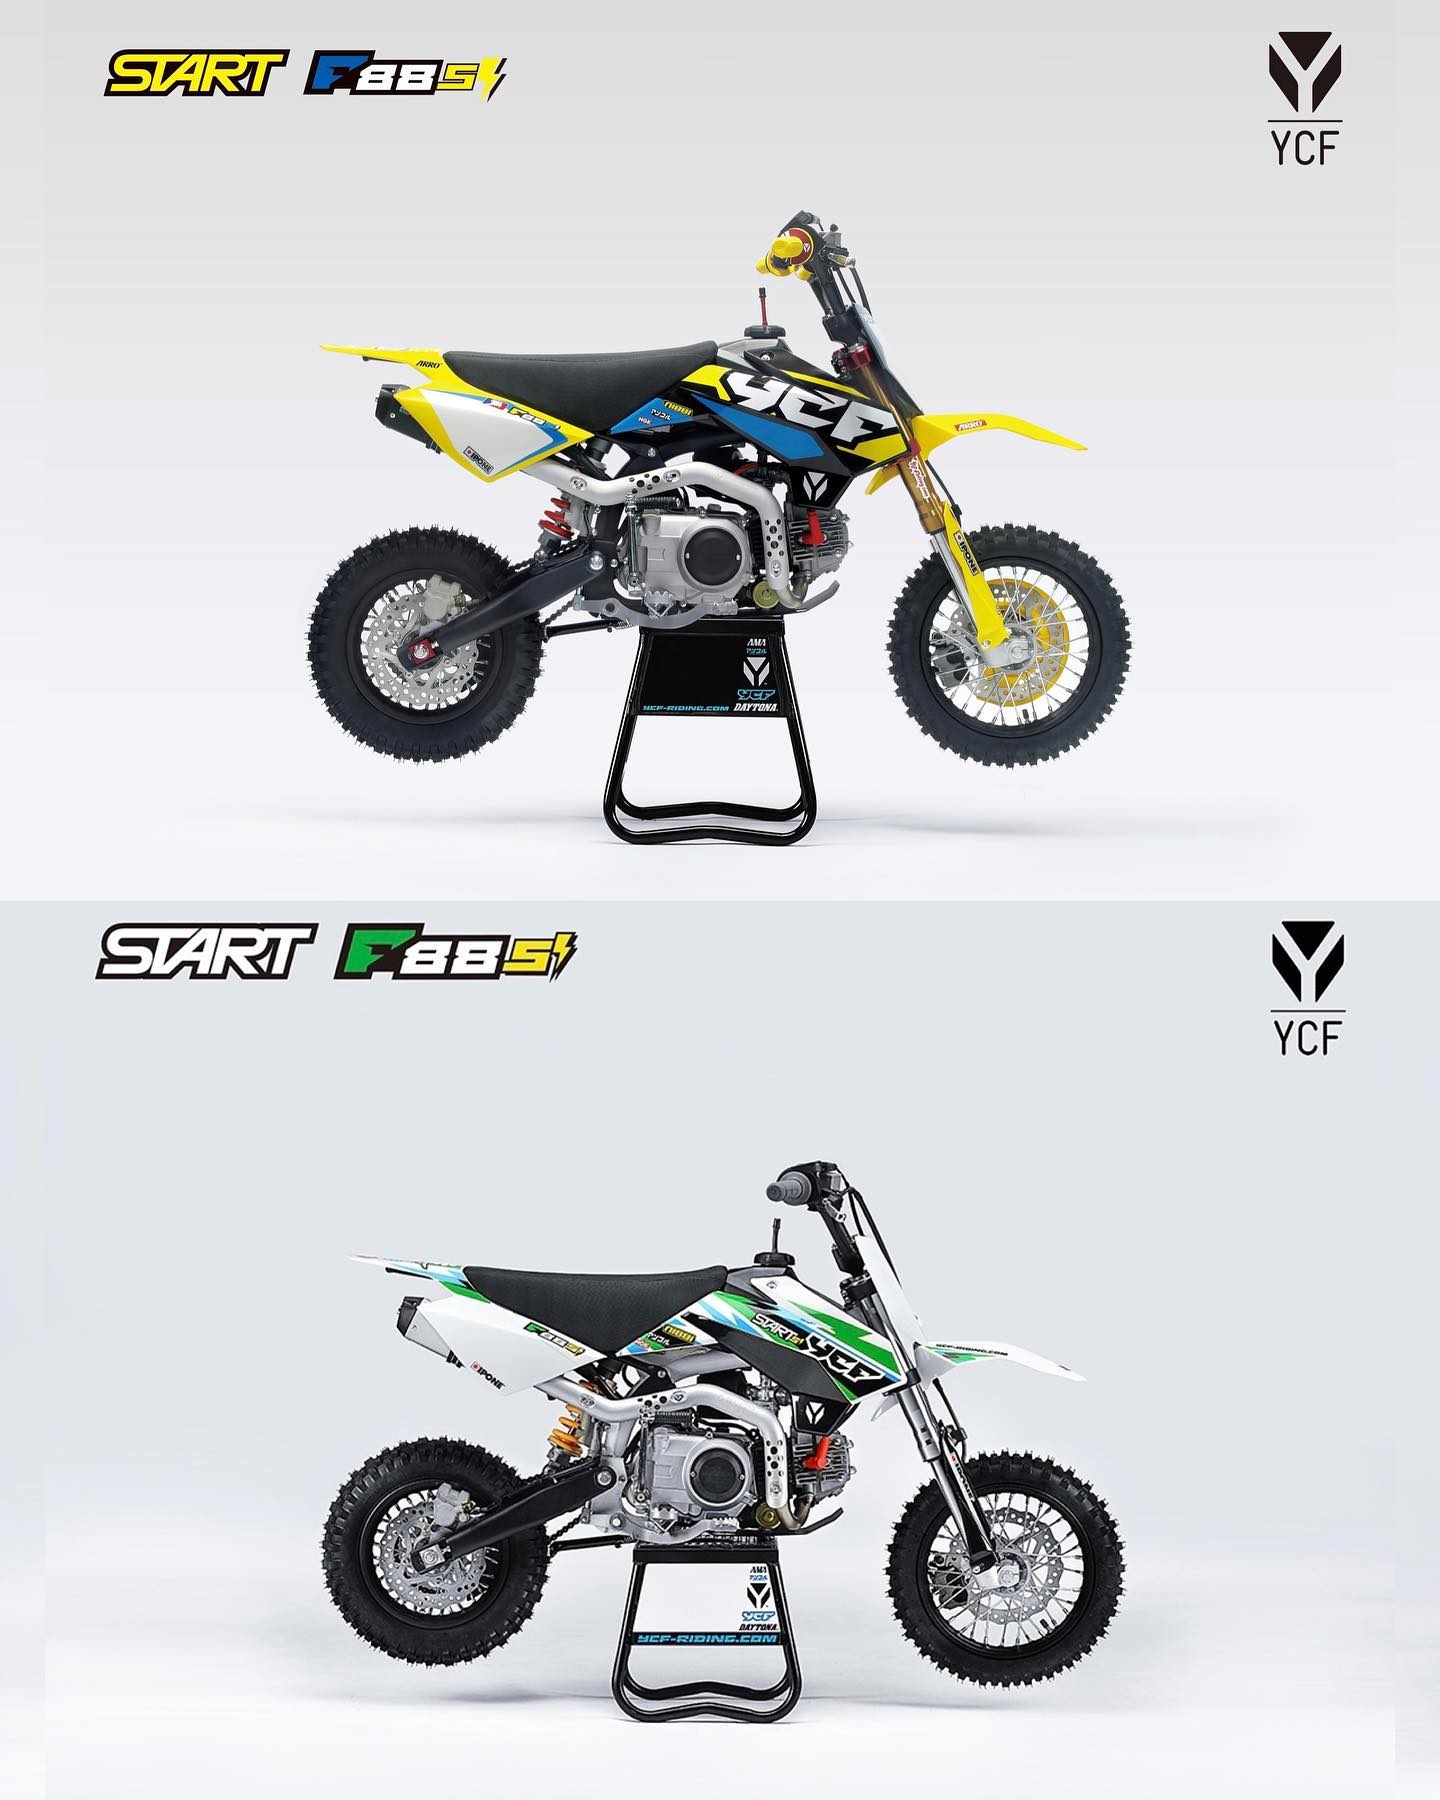 F88S⚡️LIMITED EDITION vs CLASSIC
Who wins the battle? 🤙
—
#ycf #pitbike #moto #motorcycle #motocross